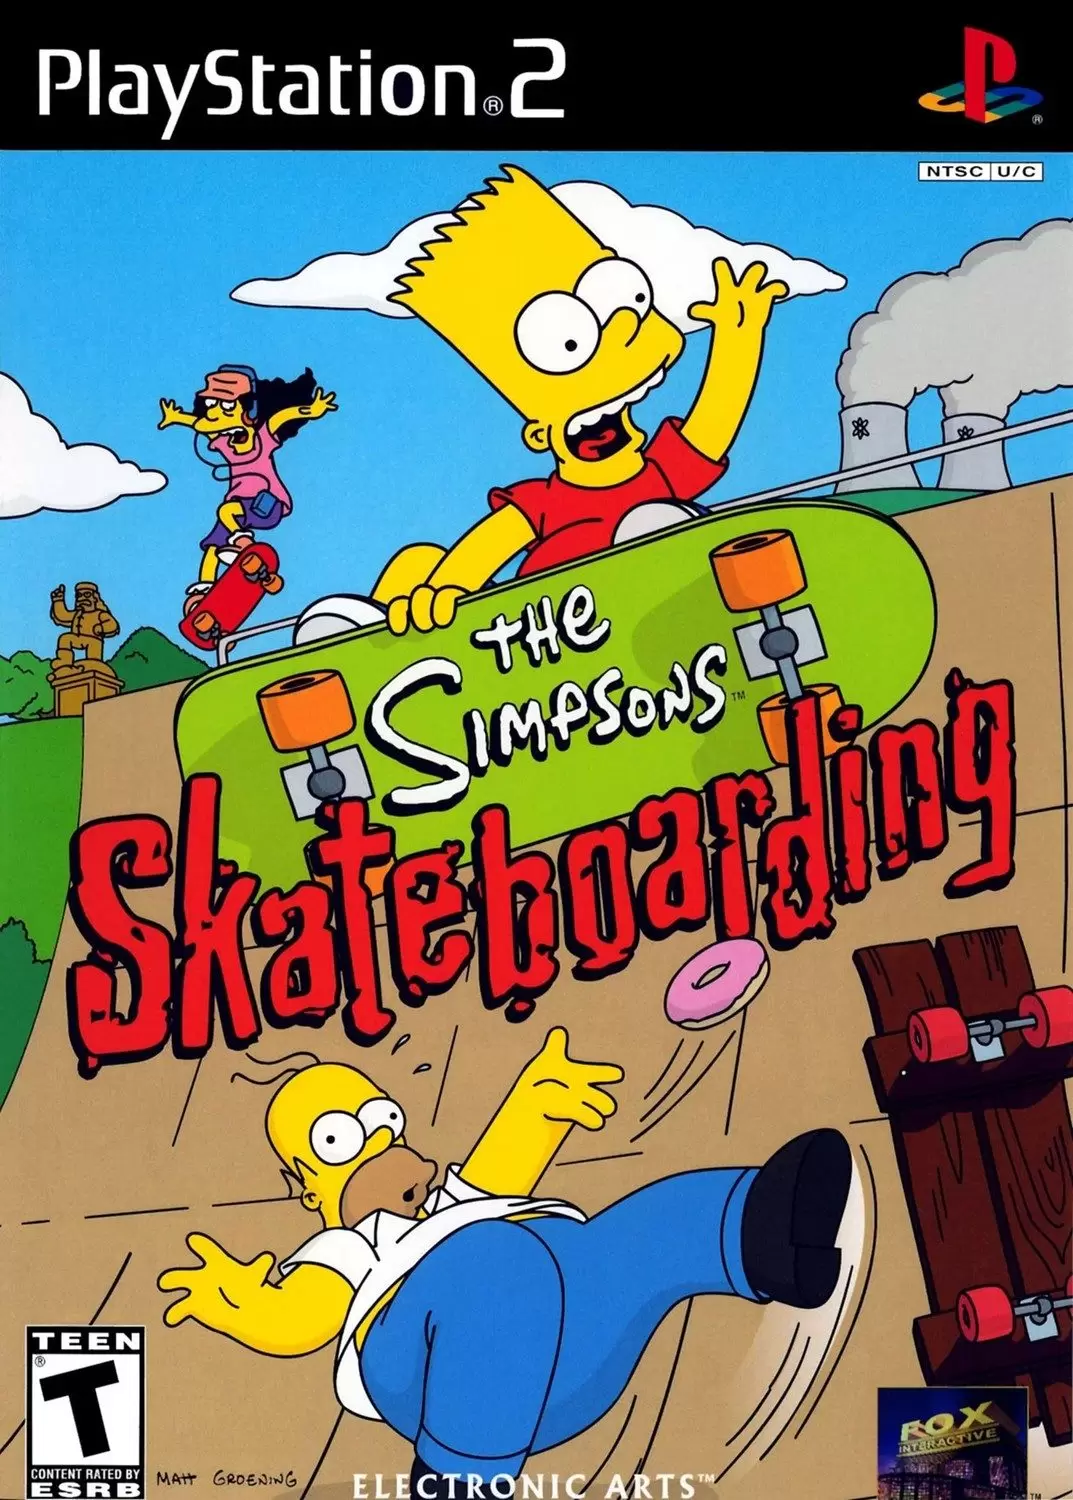 Jeux PS2 - The Simpsons Skateboarding